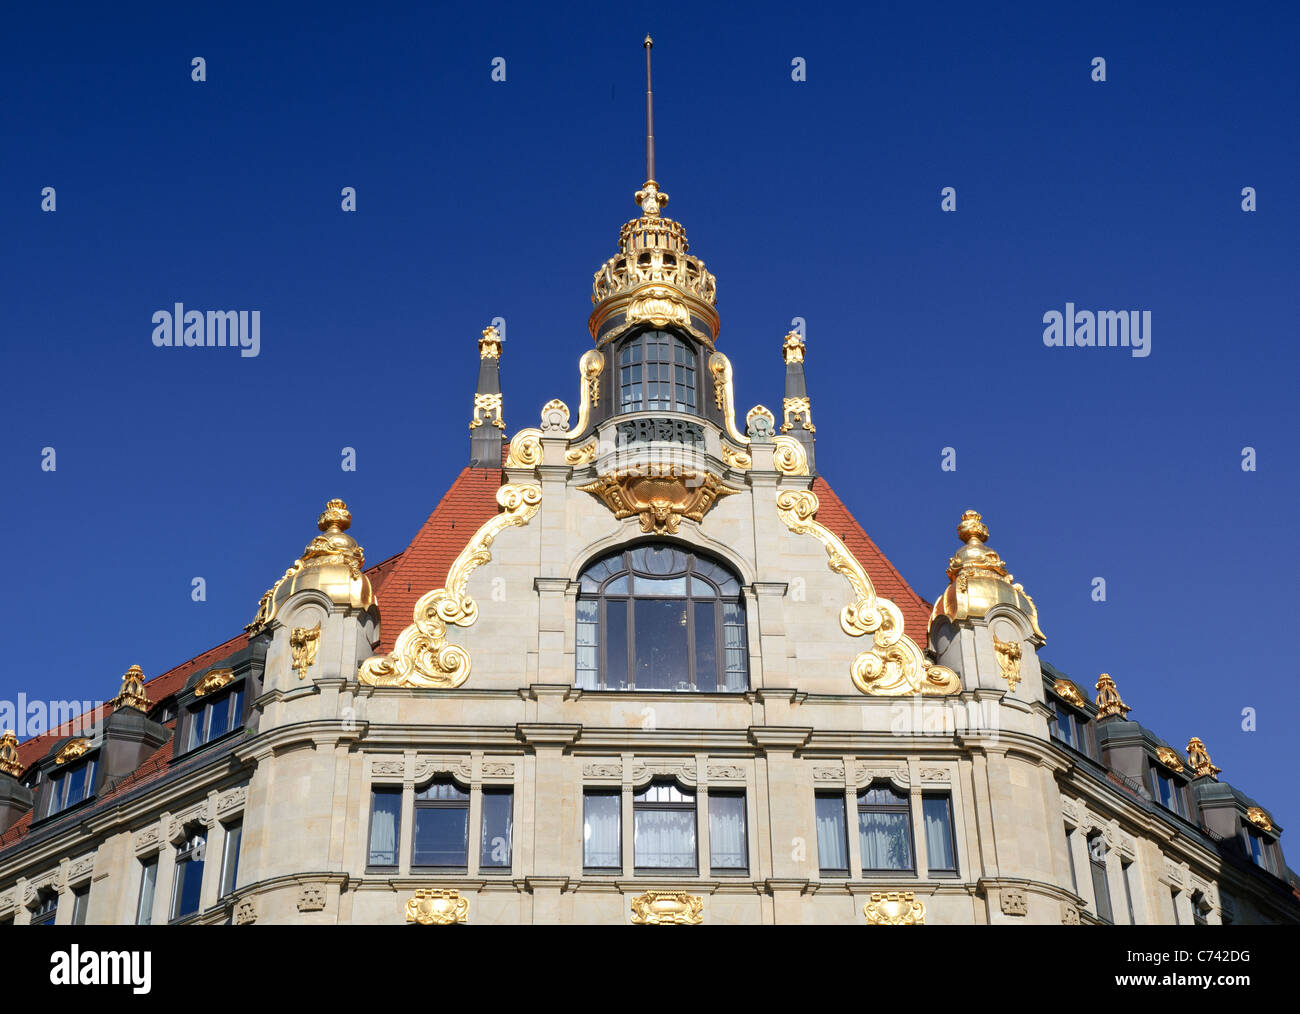 Department Stores In Saxony High Resolution Stock Photography And Images Alamy